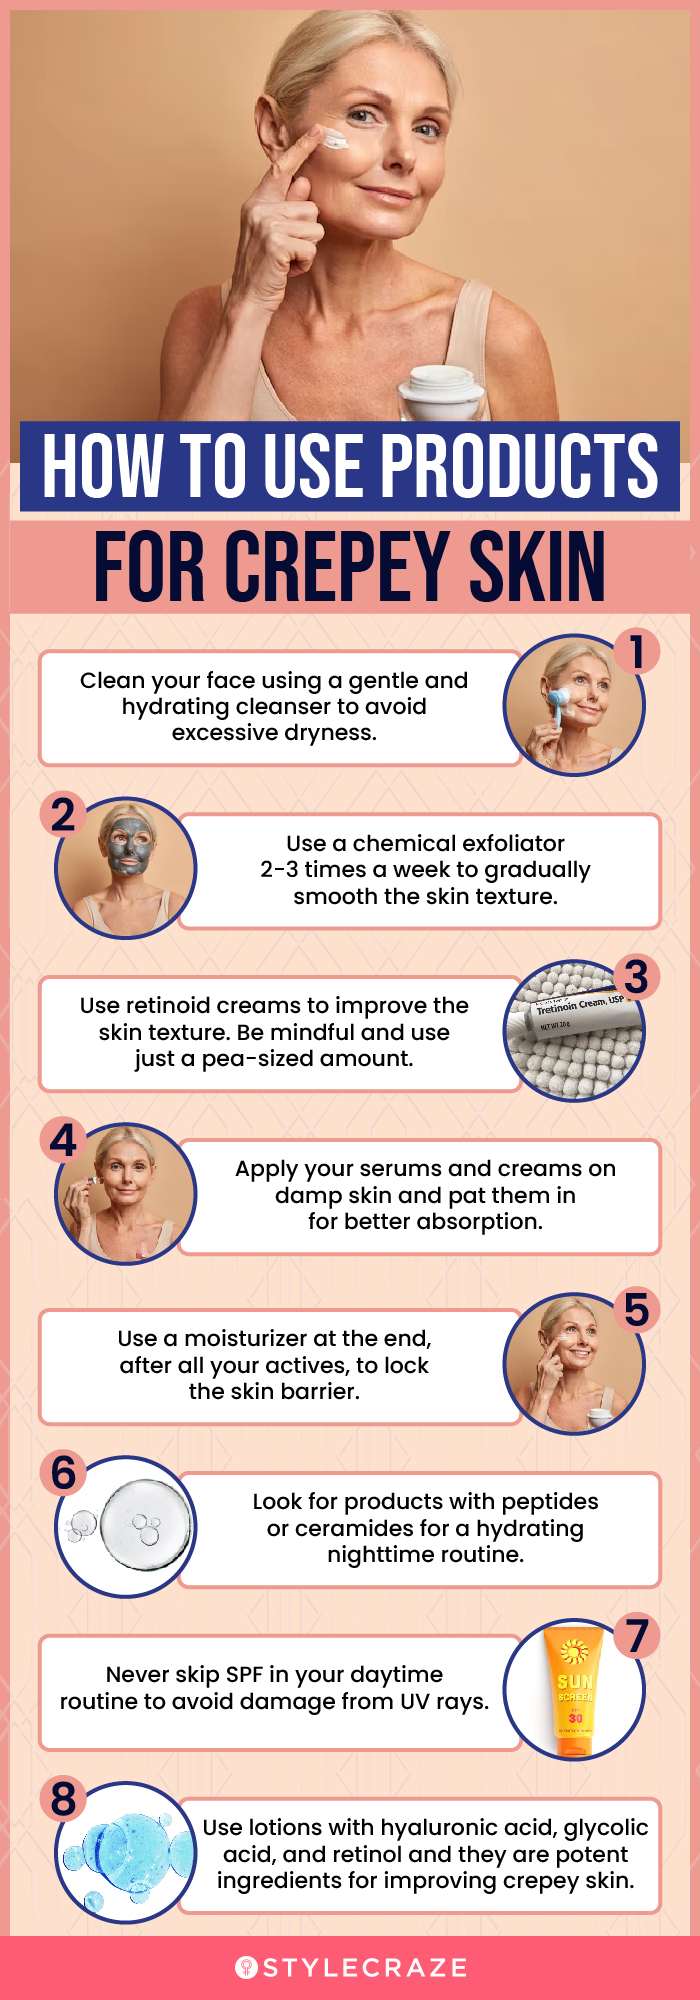 Infographic: How To Use Products For Crepey Skin (infographic)